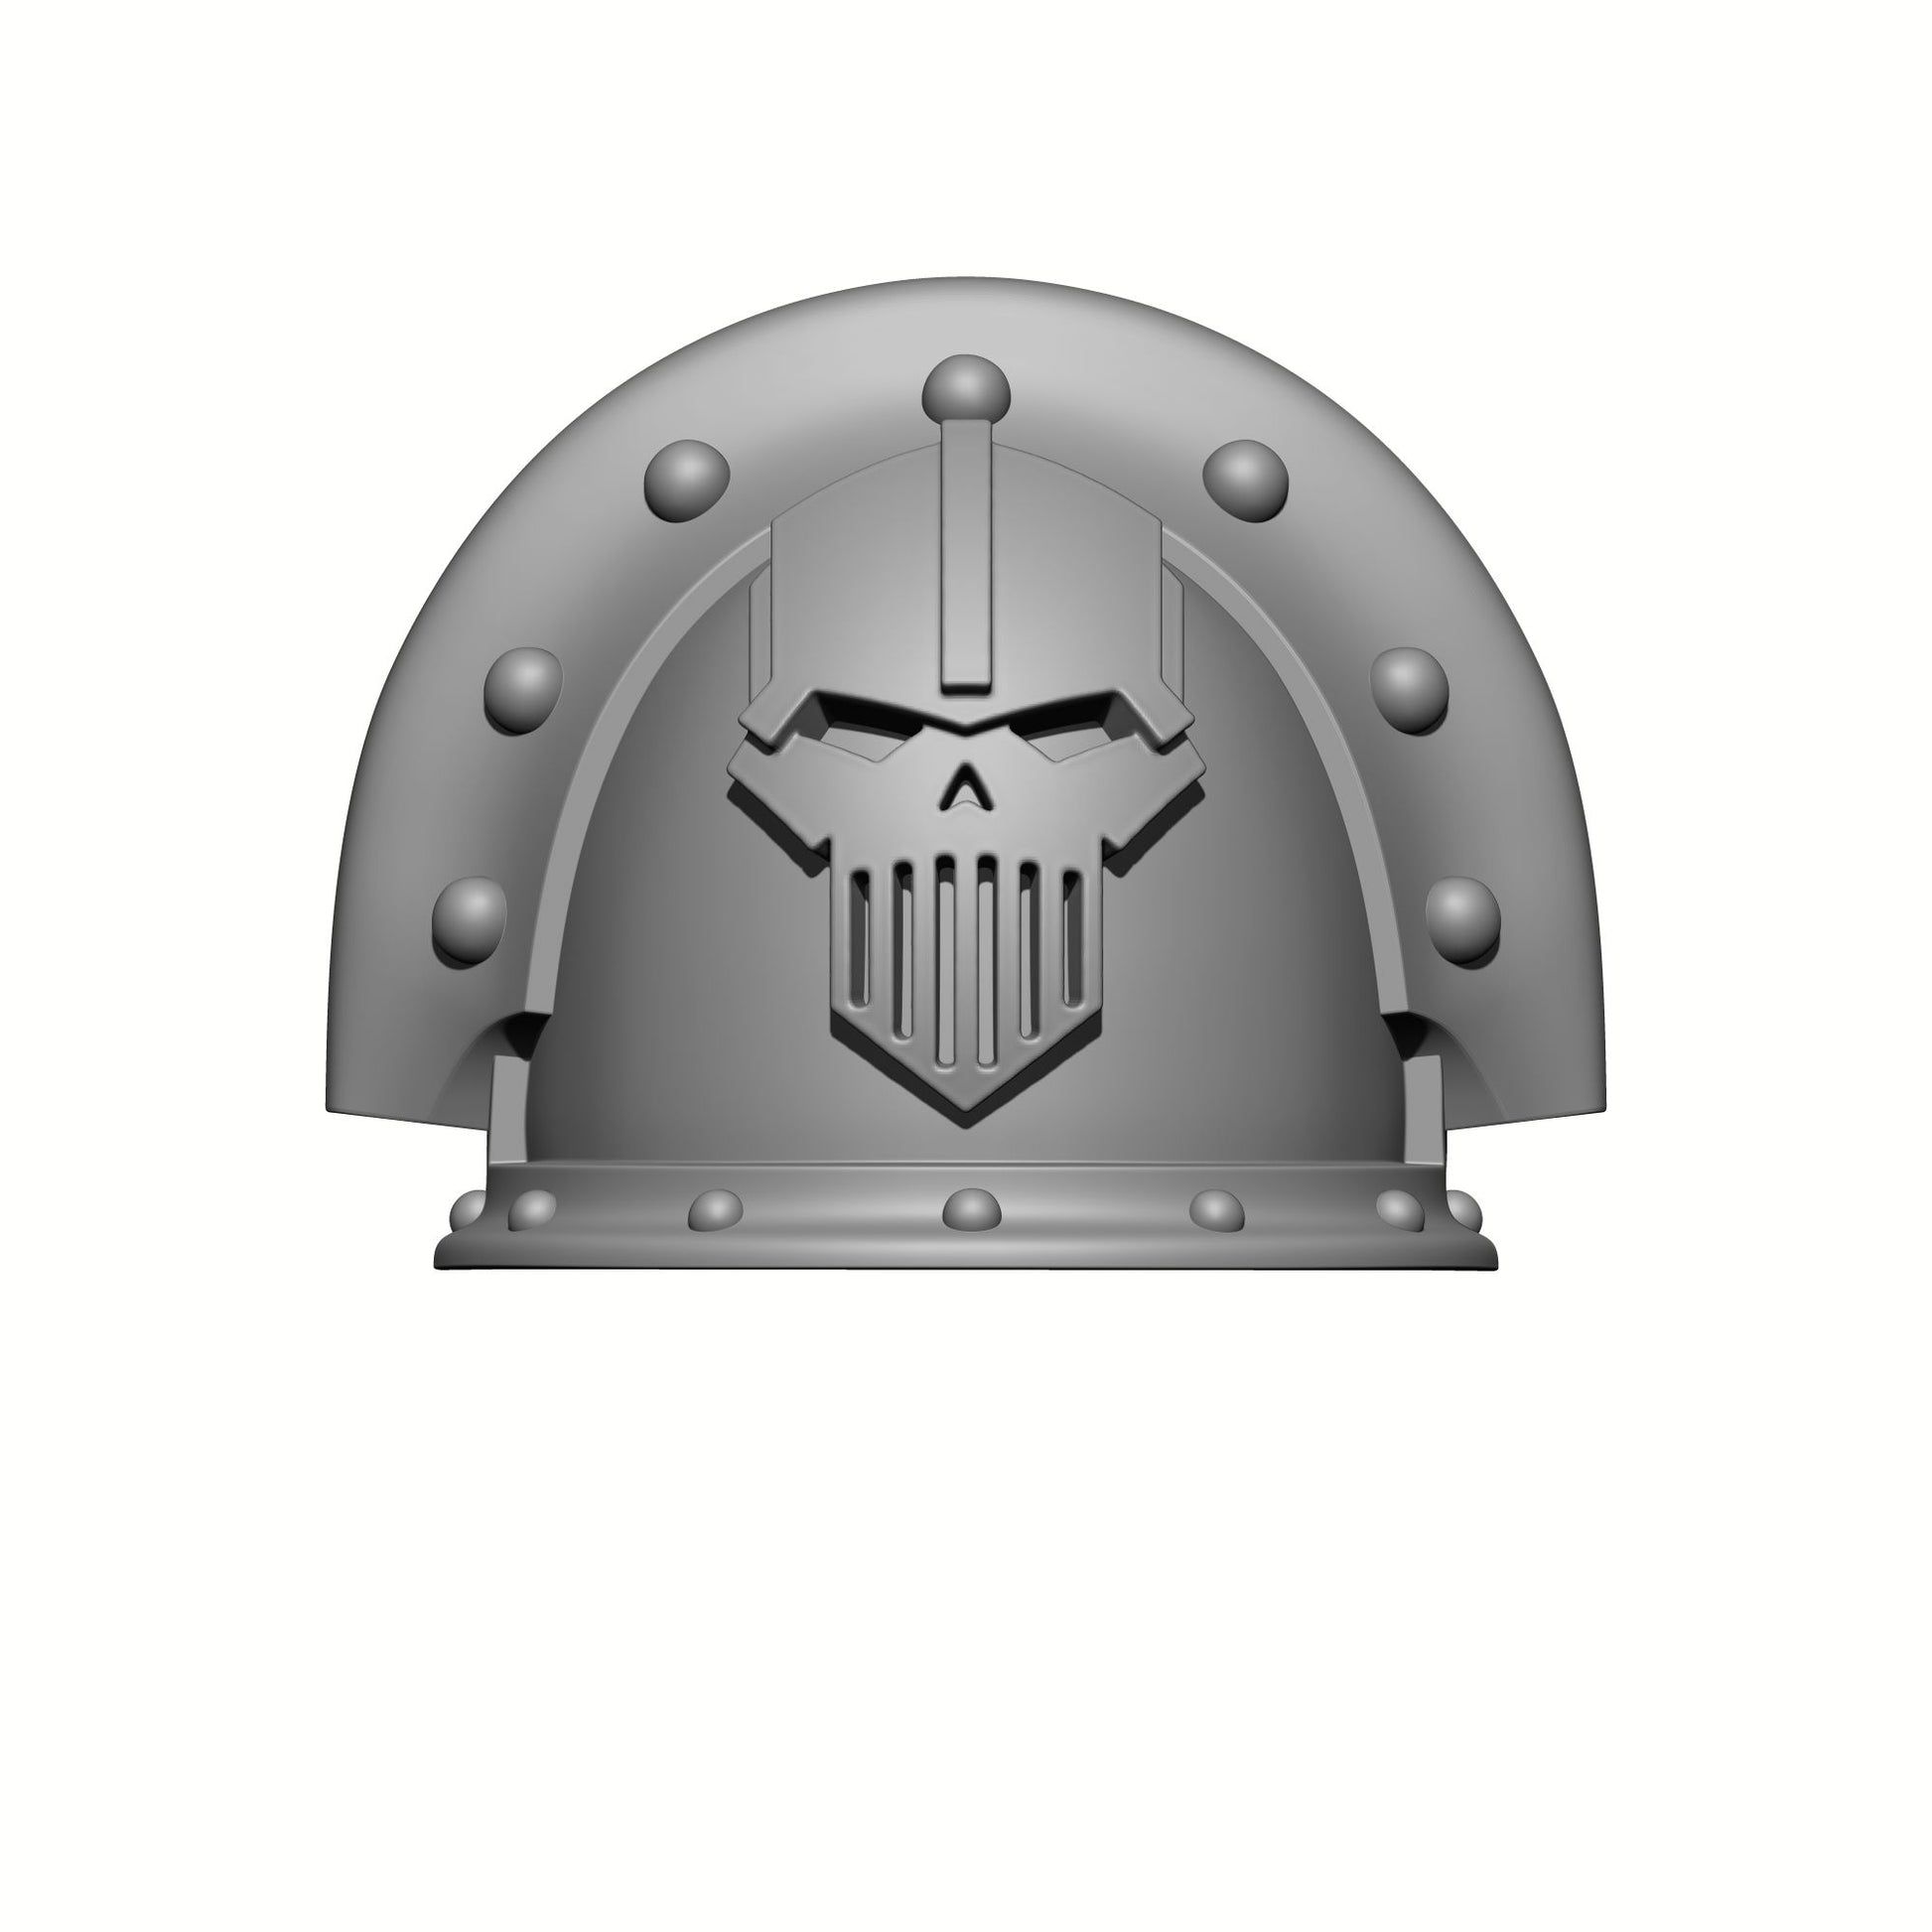 18th Scale Armory Designed Iron Warriors Legion MKIII Shoulder Pad Compatible with JoyToy Space Marine 1:18 Scale Action Figures